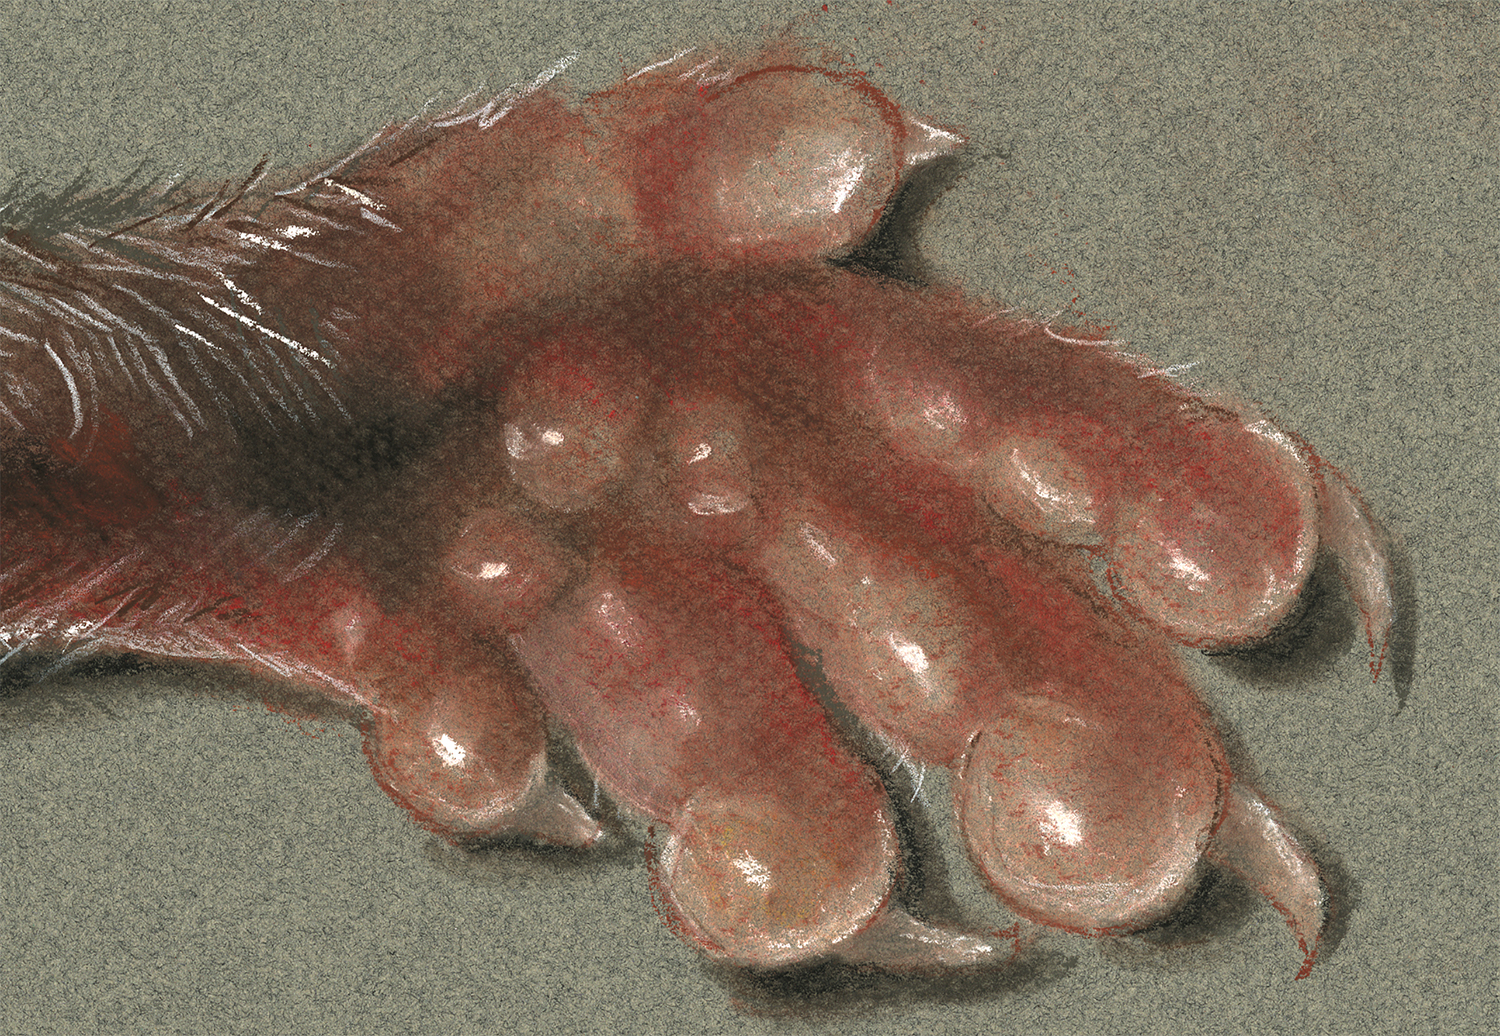 Artistic rendition of an inflamed footpad. Artwork by Phillip Sisti